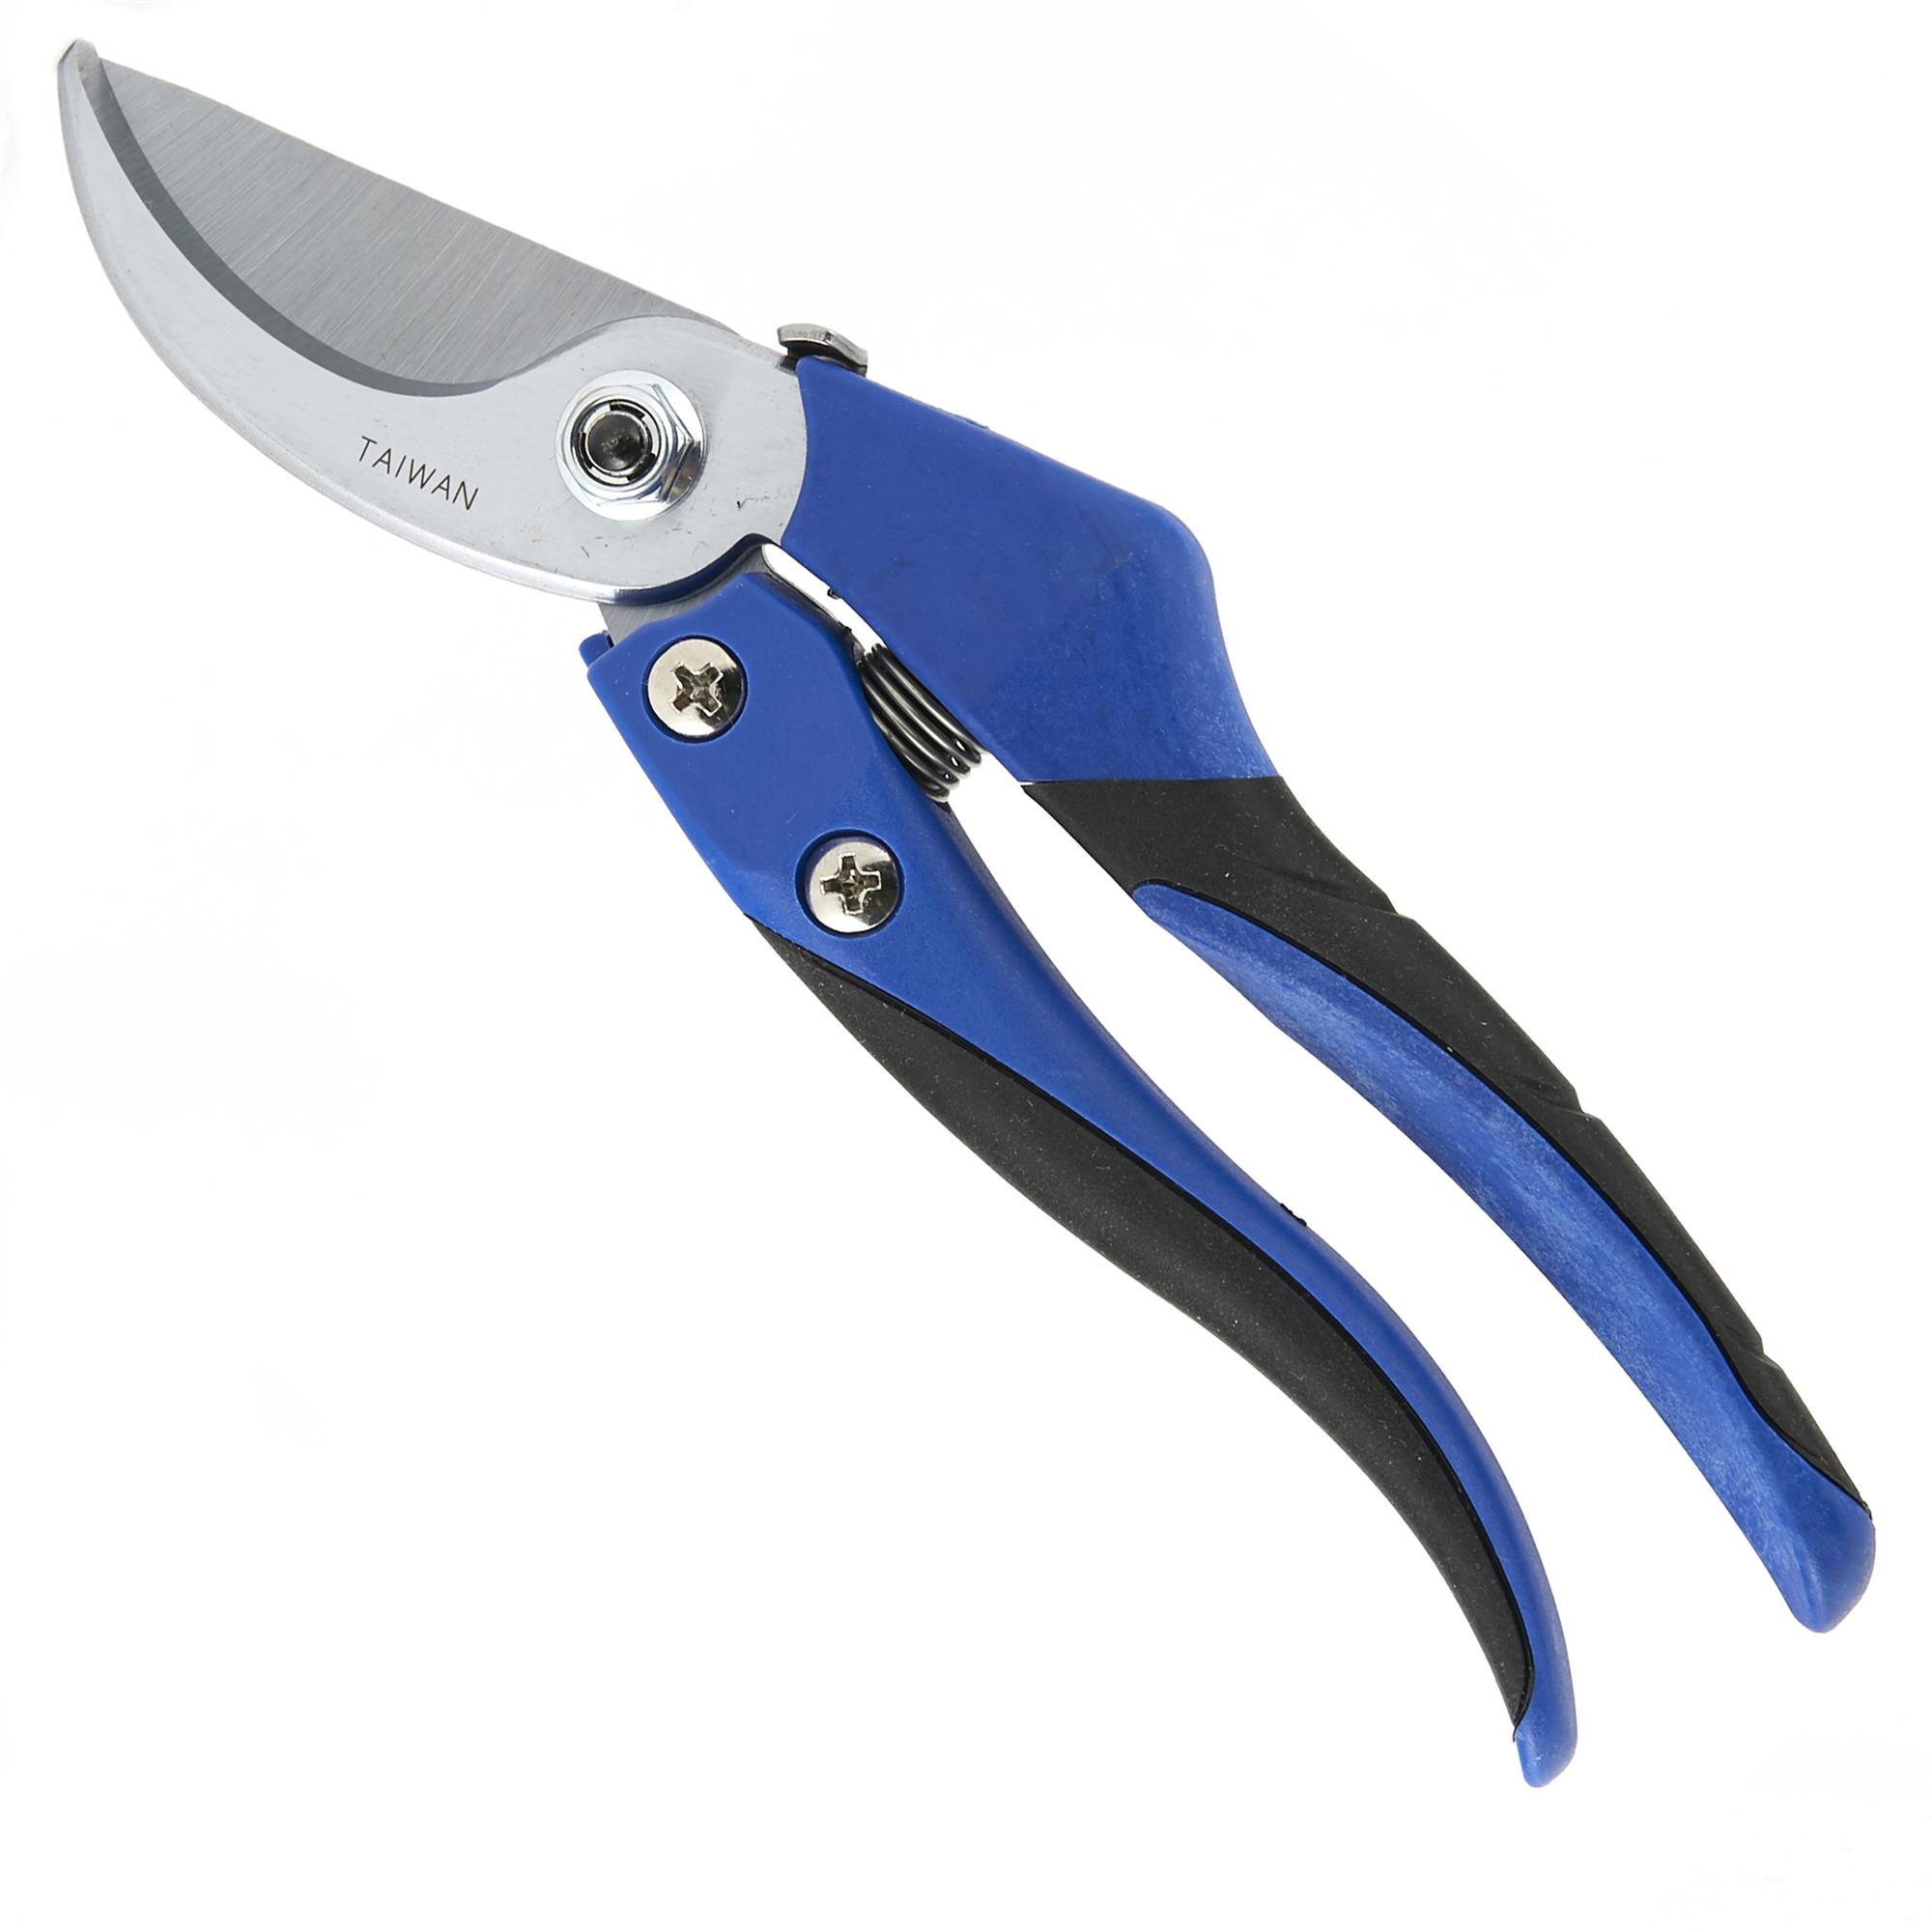 PRECISION THICK PRUNER